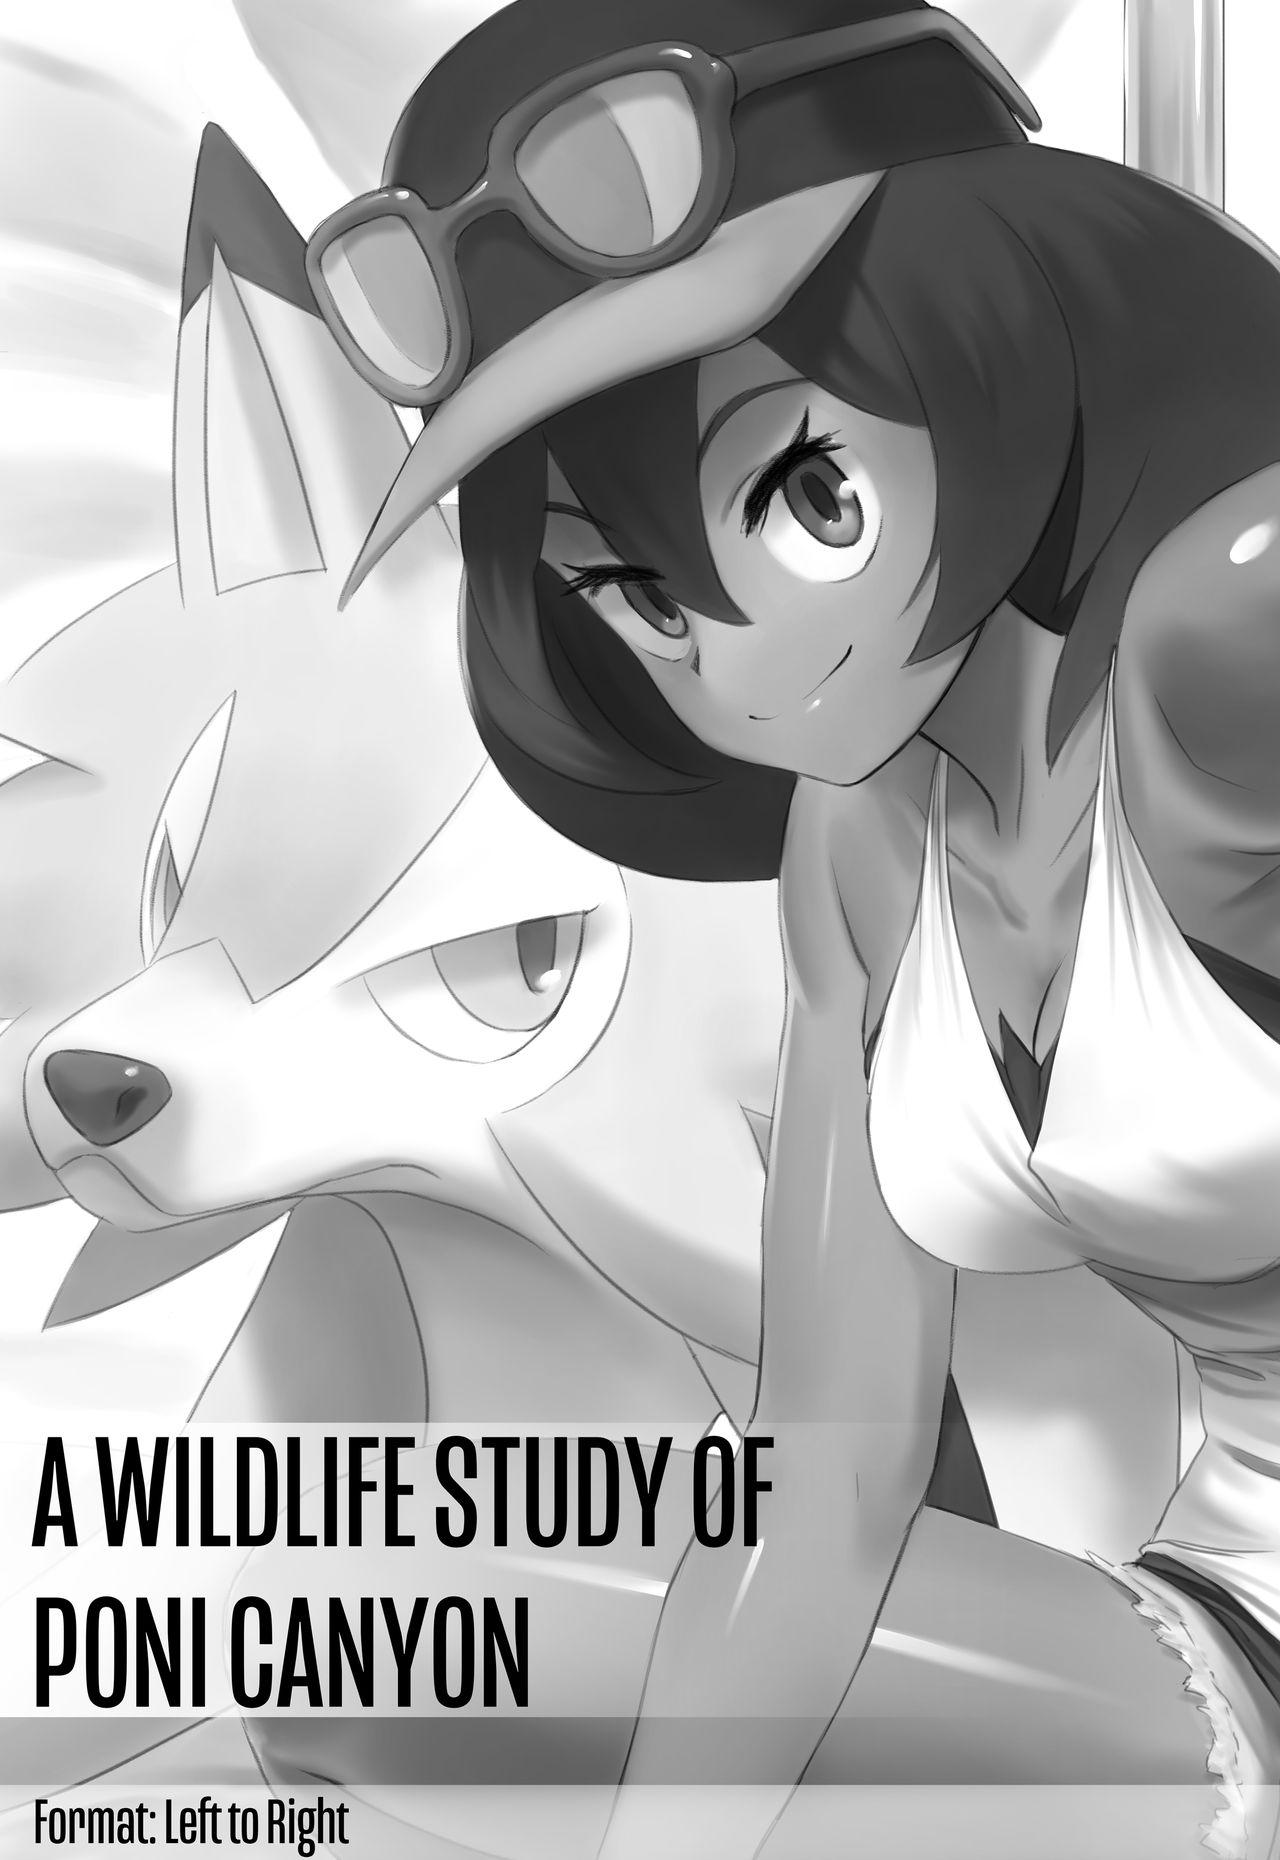 Fisting A Wildlife Study of Poni Canyon - Pokemon | pocket monsters Bj - Page 1